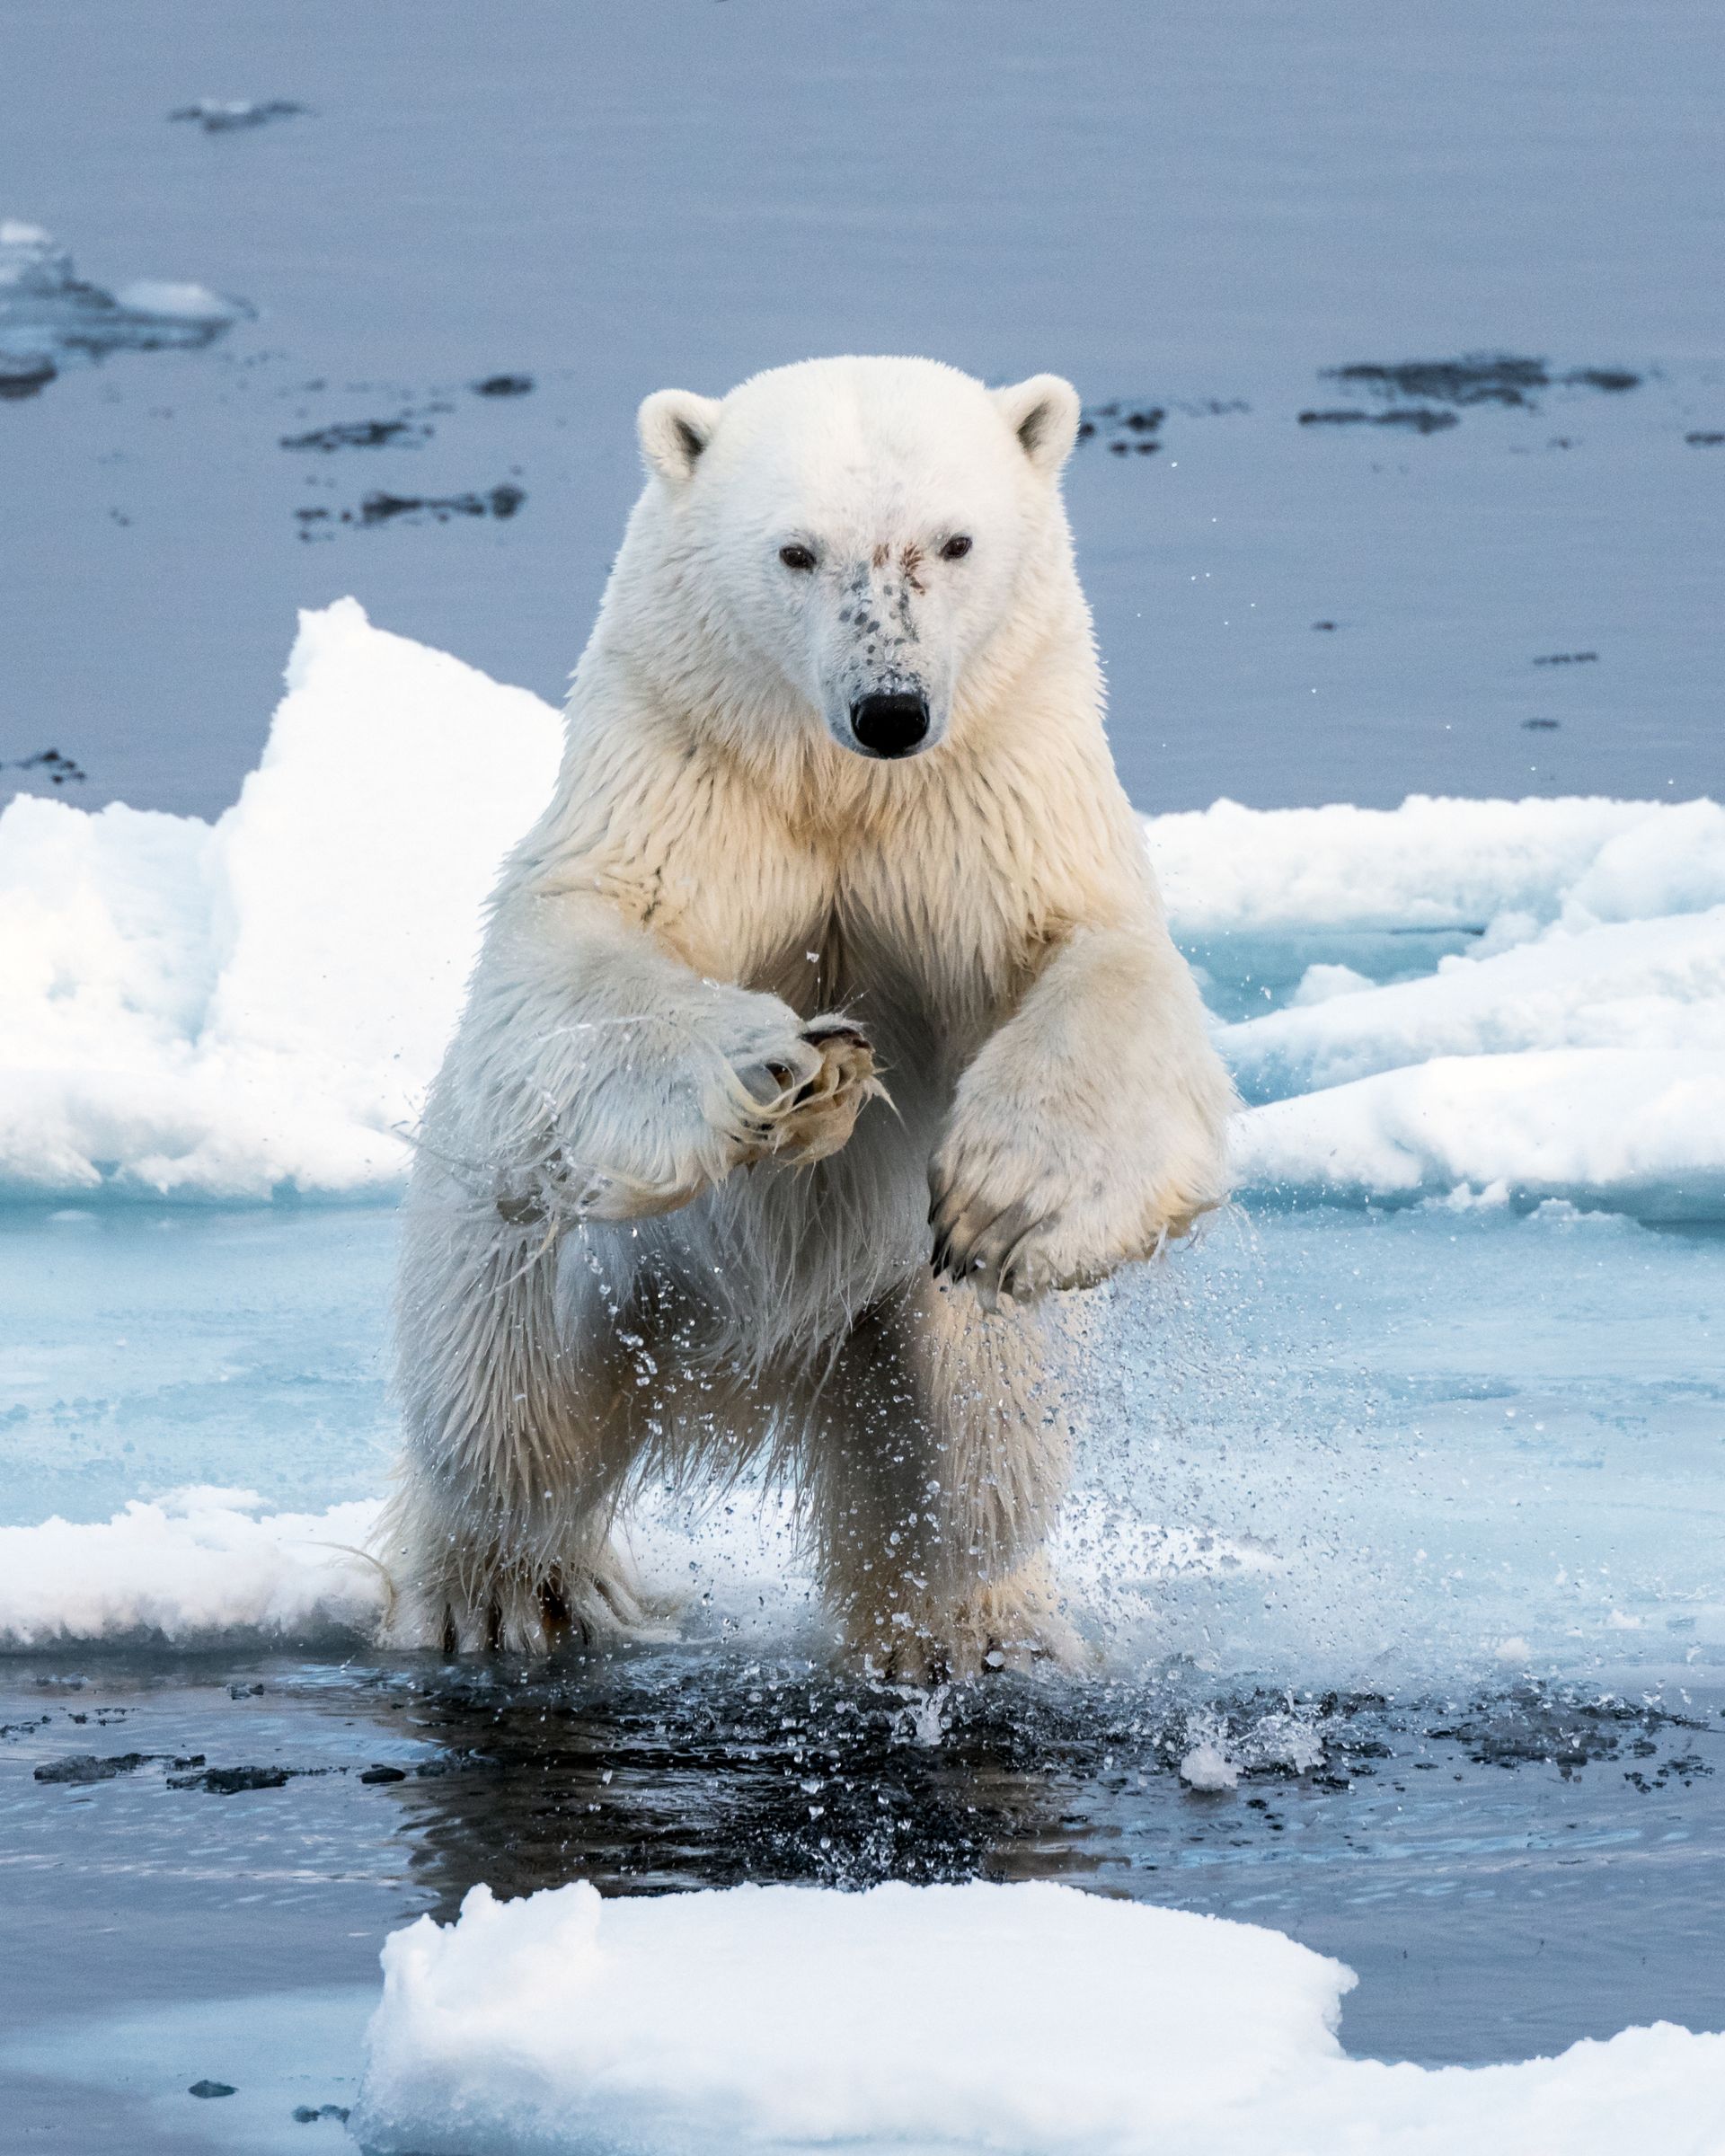 A polar bear leaps over a gap in the ice, aiming for a small natural platform in a scattered field of glacial remnants.